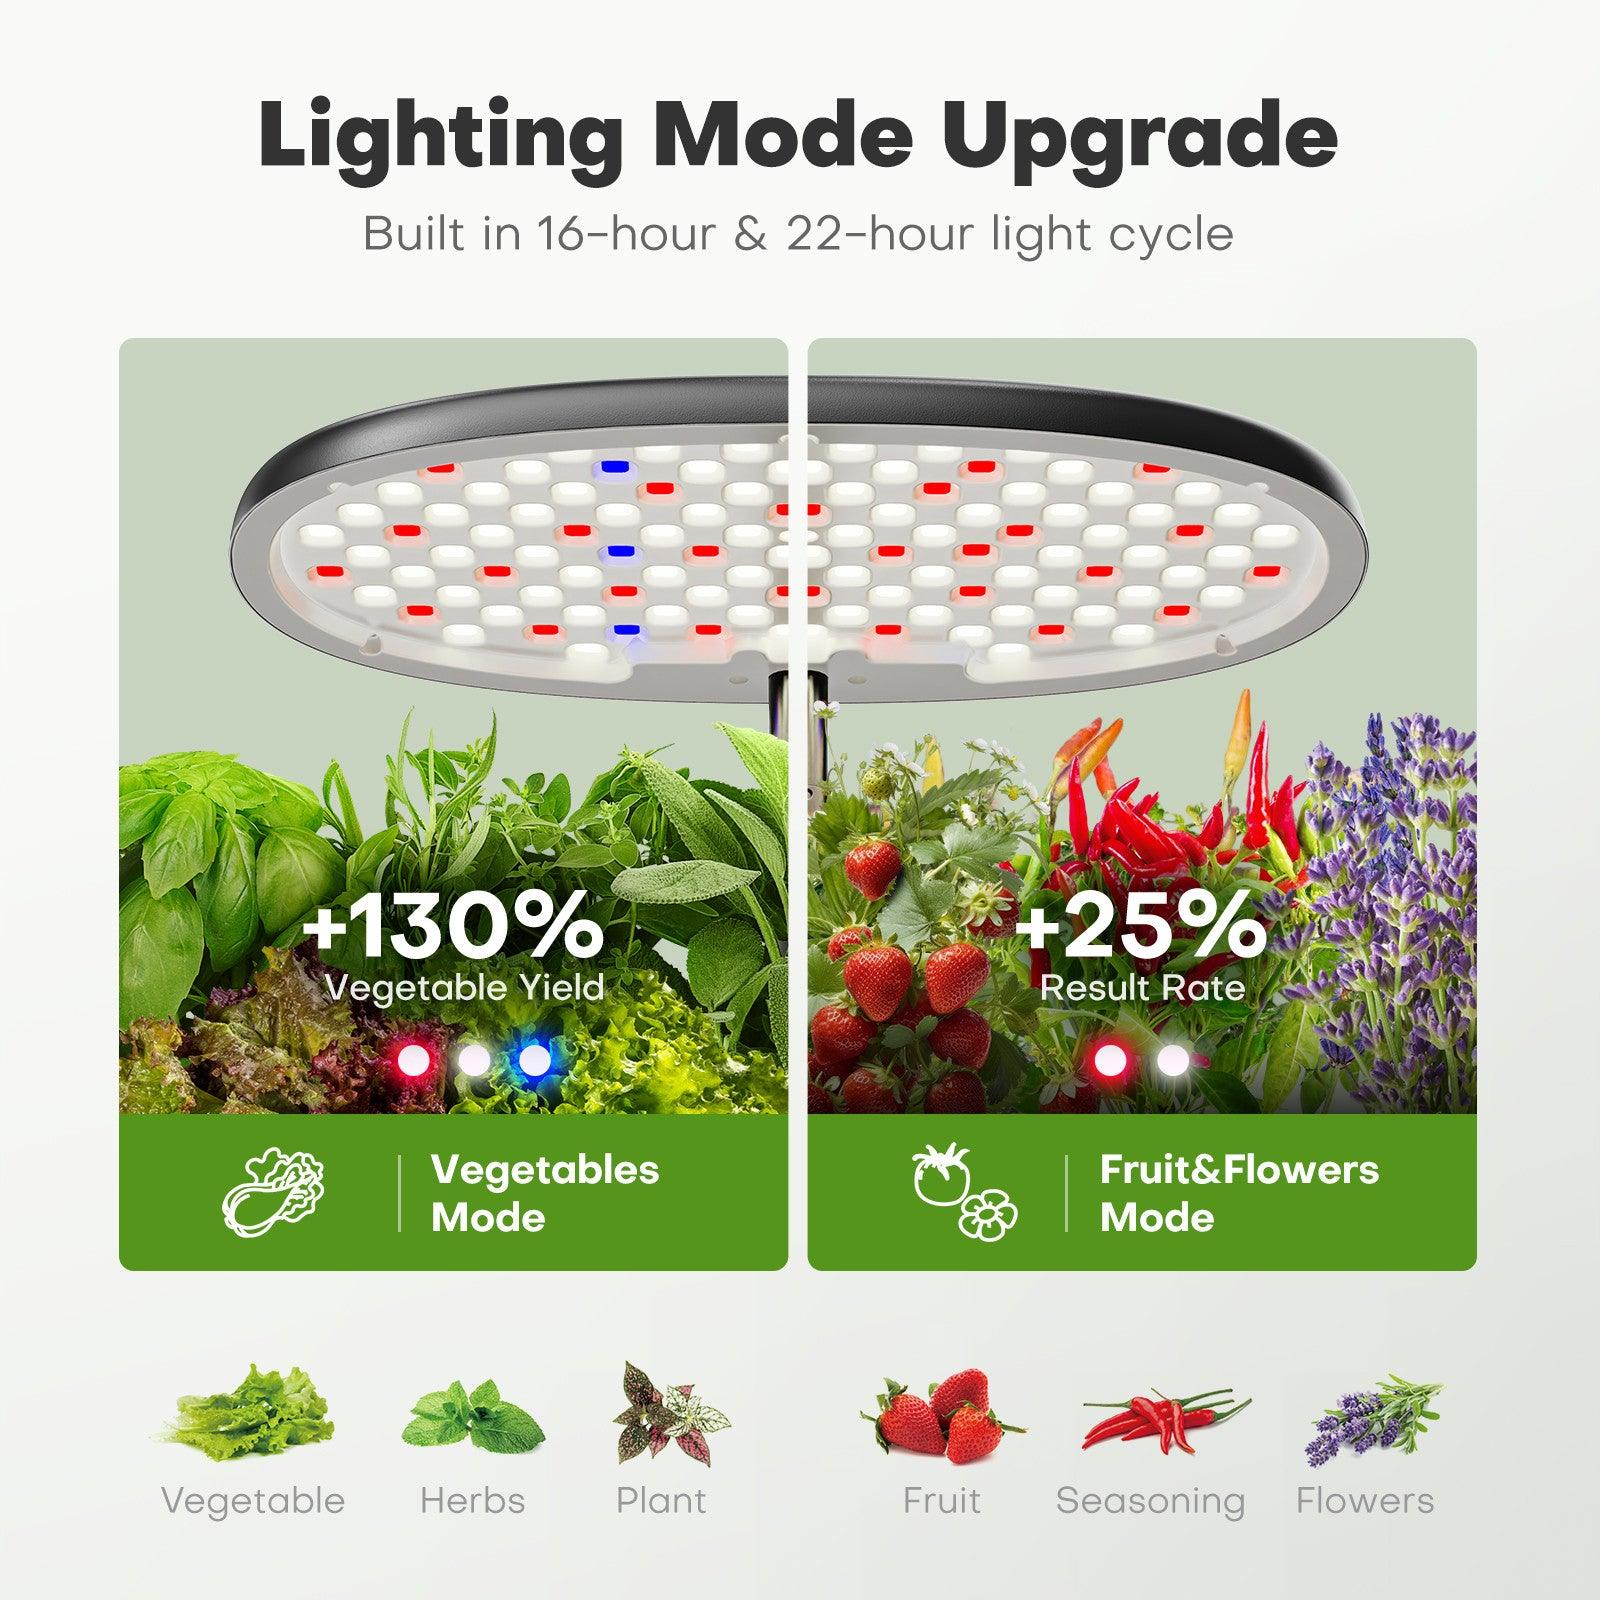 Lighting Mode Upgrade to Boost Result Rate by Up to 25%%